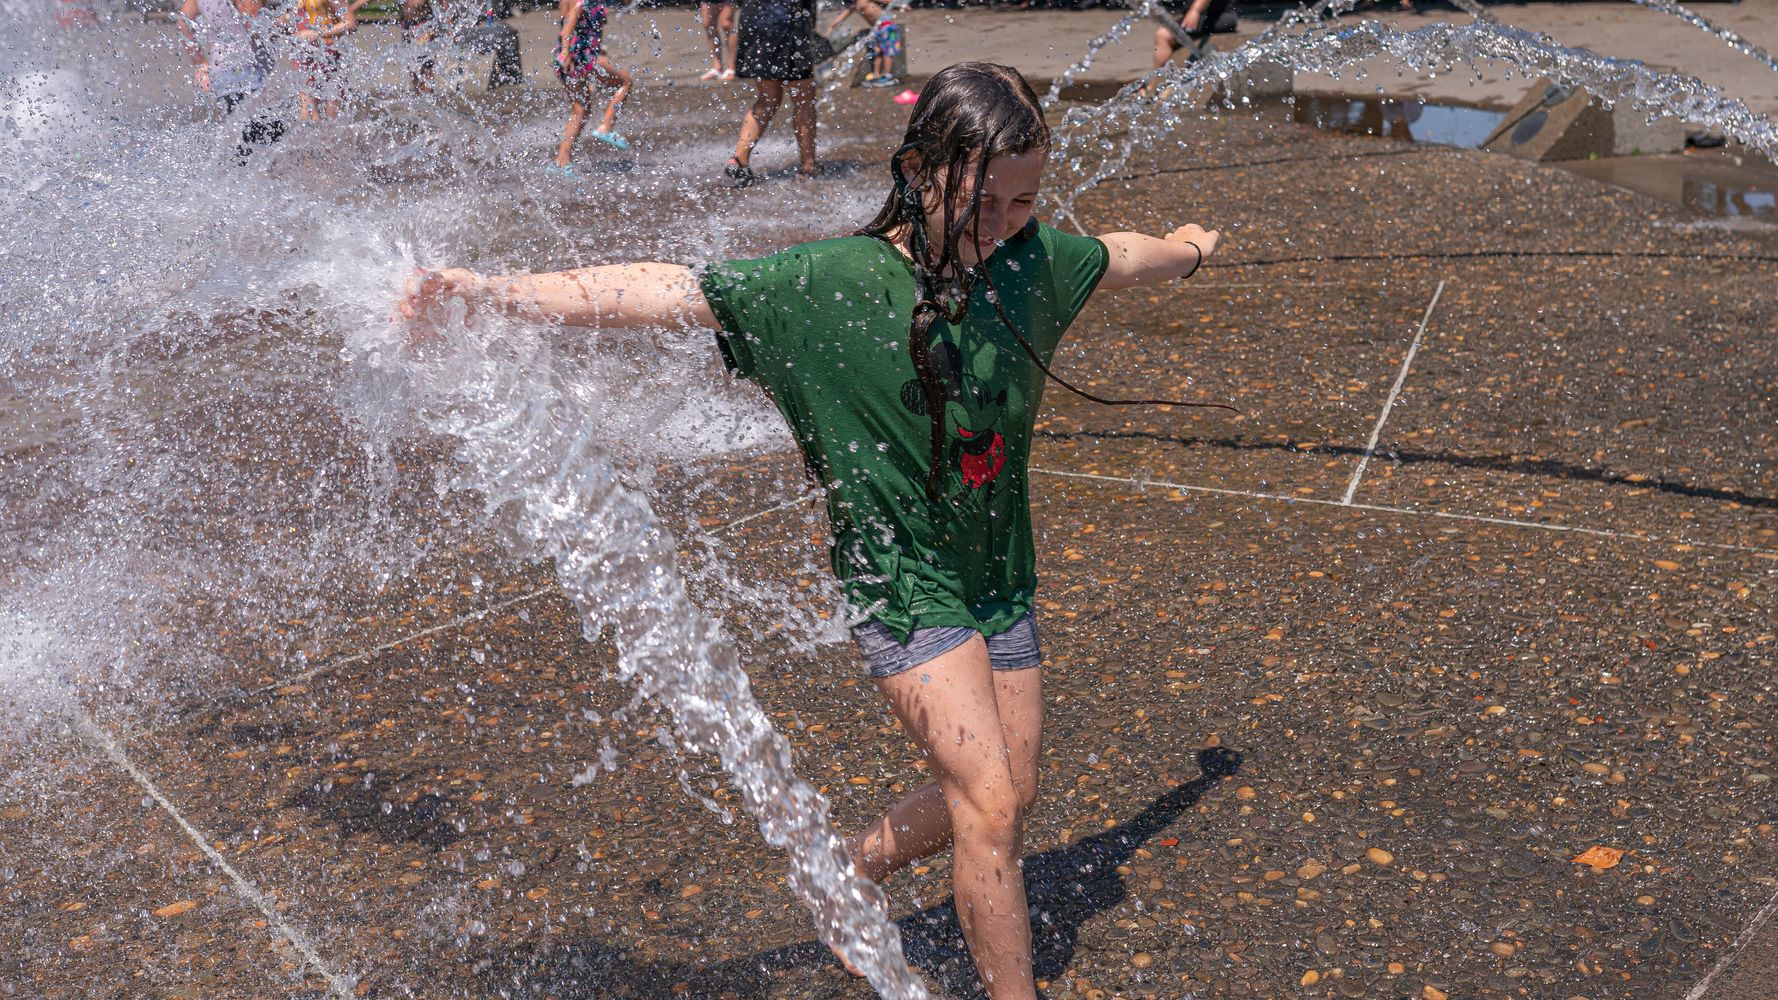 Pacific Northwest Heat Records Shattered As Seattle Hits 104F, Portland 112F